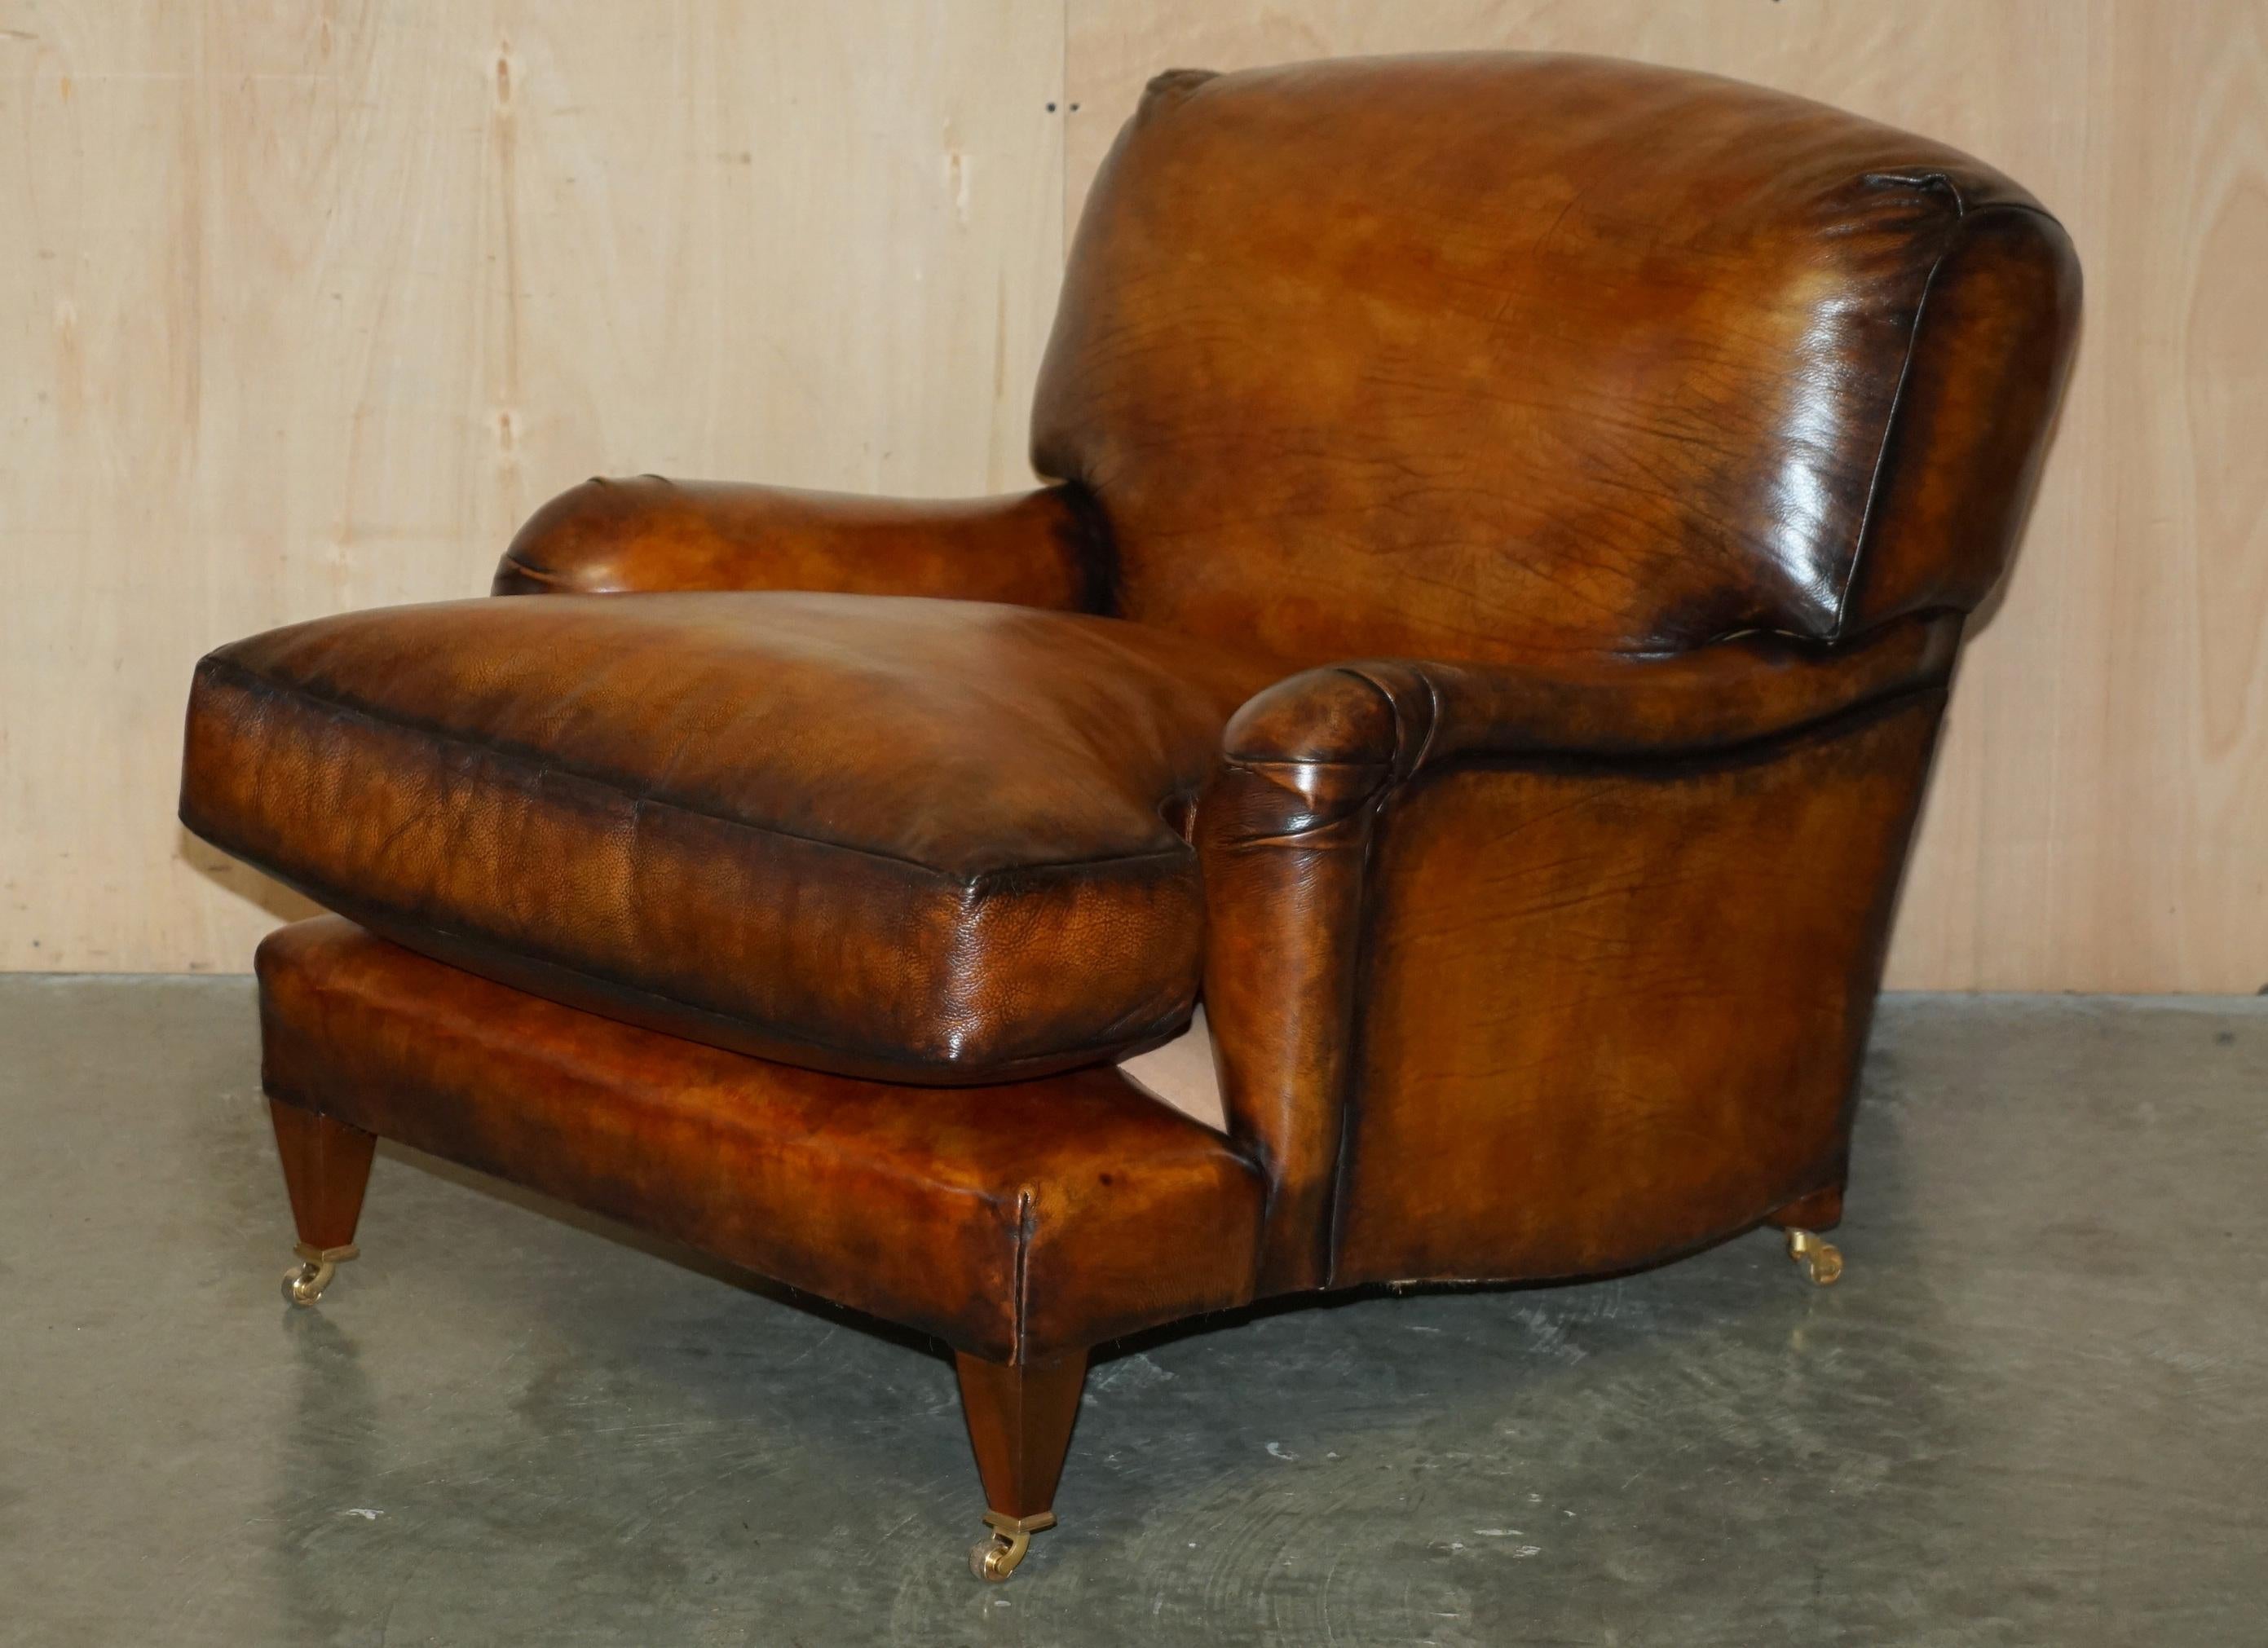 Royal House Antiques

Royal House Antiques is delighted to offer for sale this sublime large pair of fully restored Howard & Son's George Smith style Signature Scroll Arm cigar brown leather armchairs with oversized feather filled cushions.

Please